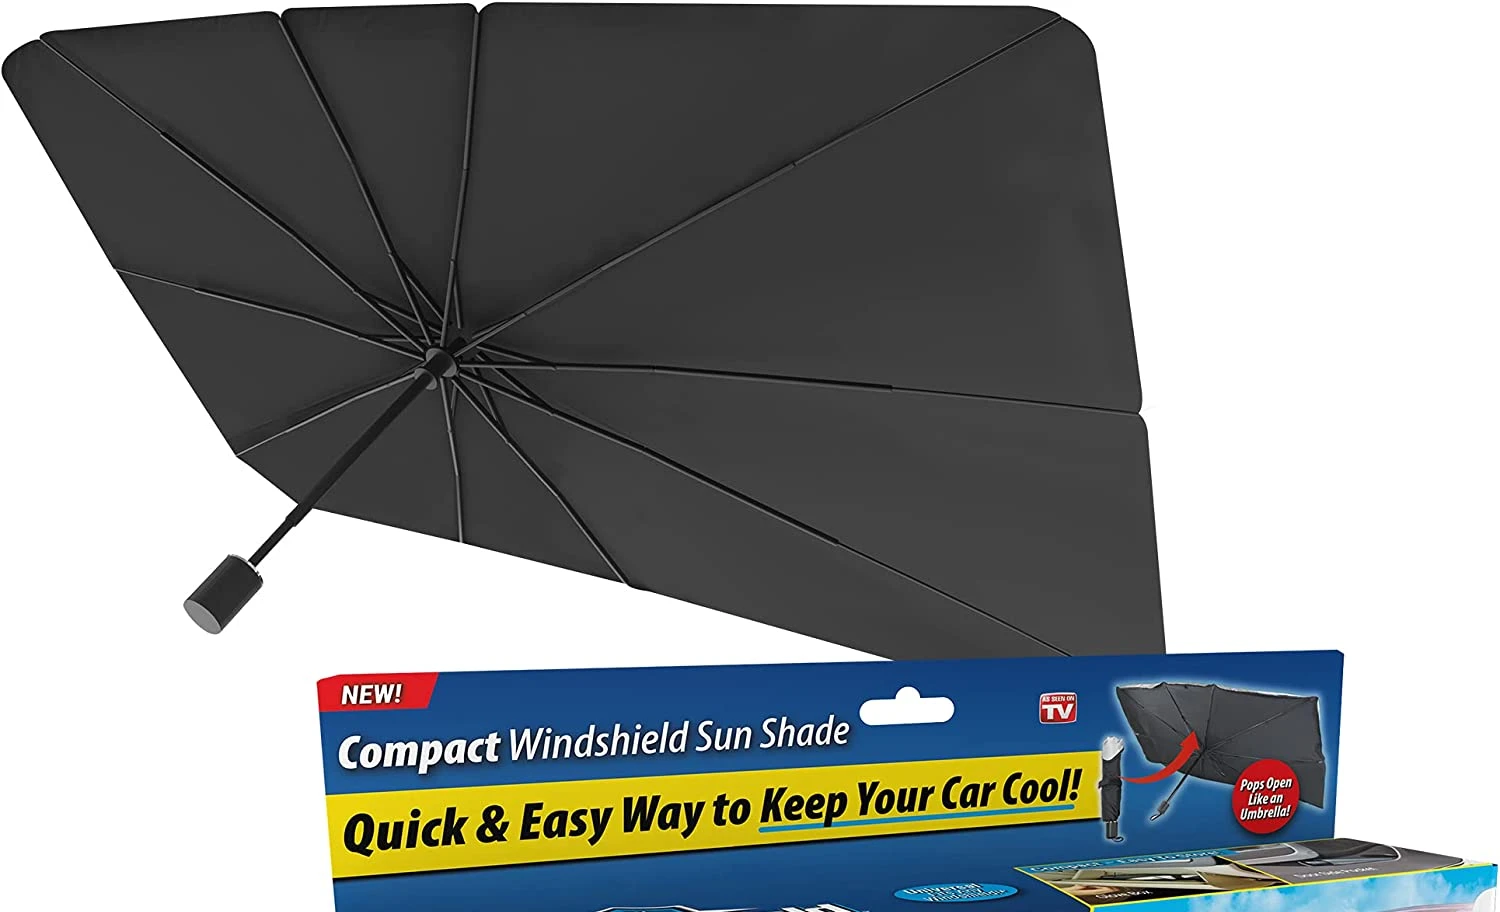 You are currently viewing Brella Shield Reviews – Is This New Product Any Good?